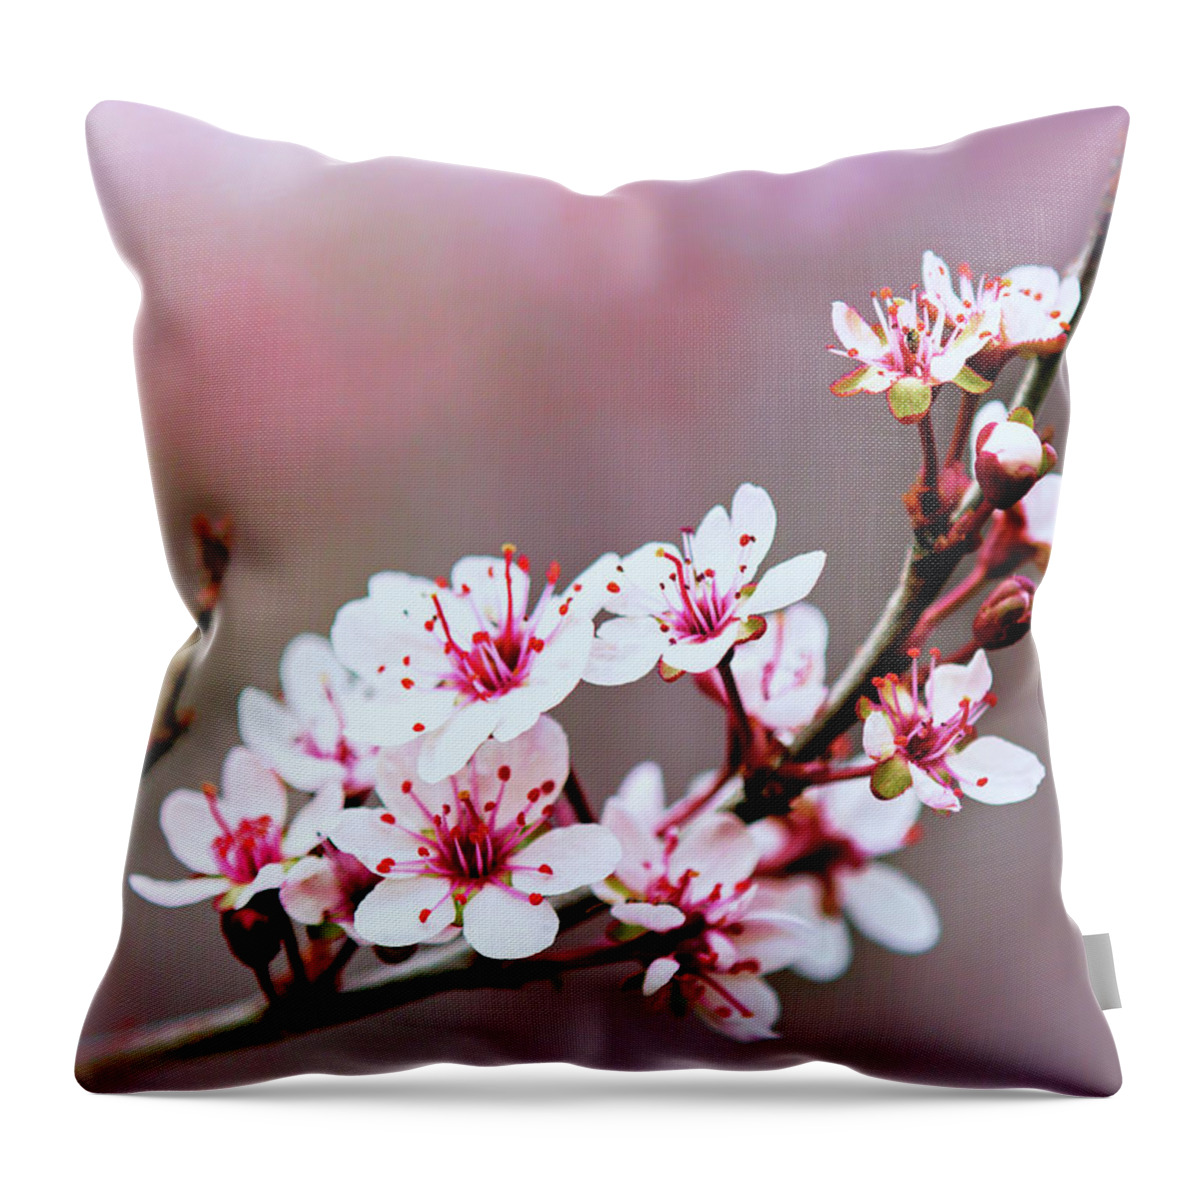 Sandcherry Blossoms Throw Pillow featuring the photograph Sandcherry Blossoms by Carolyn Derstine